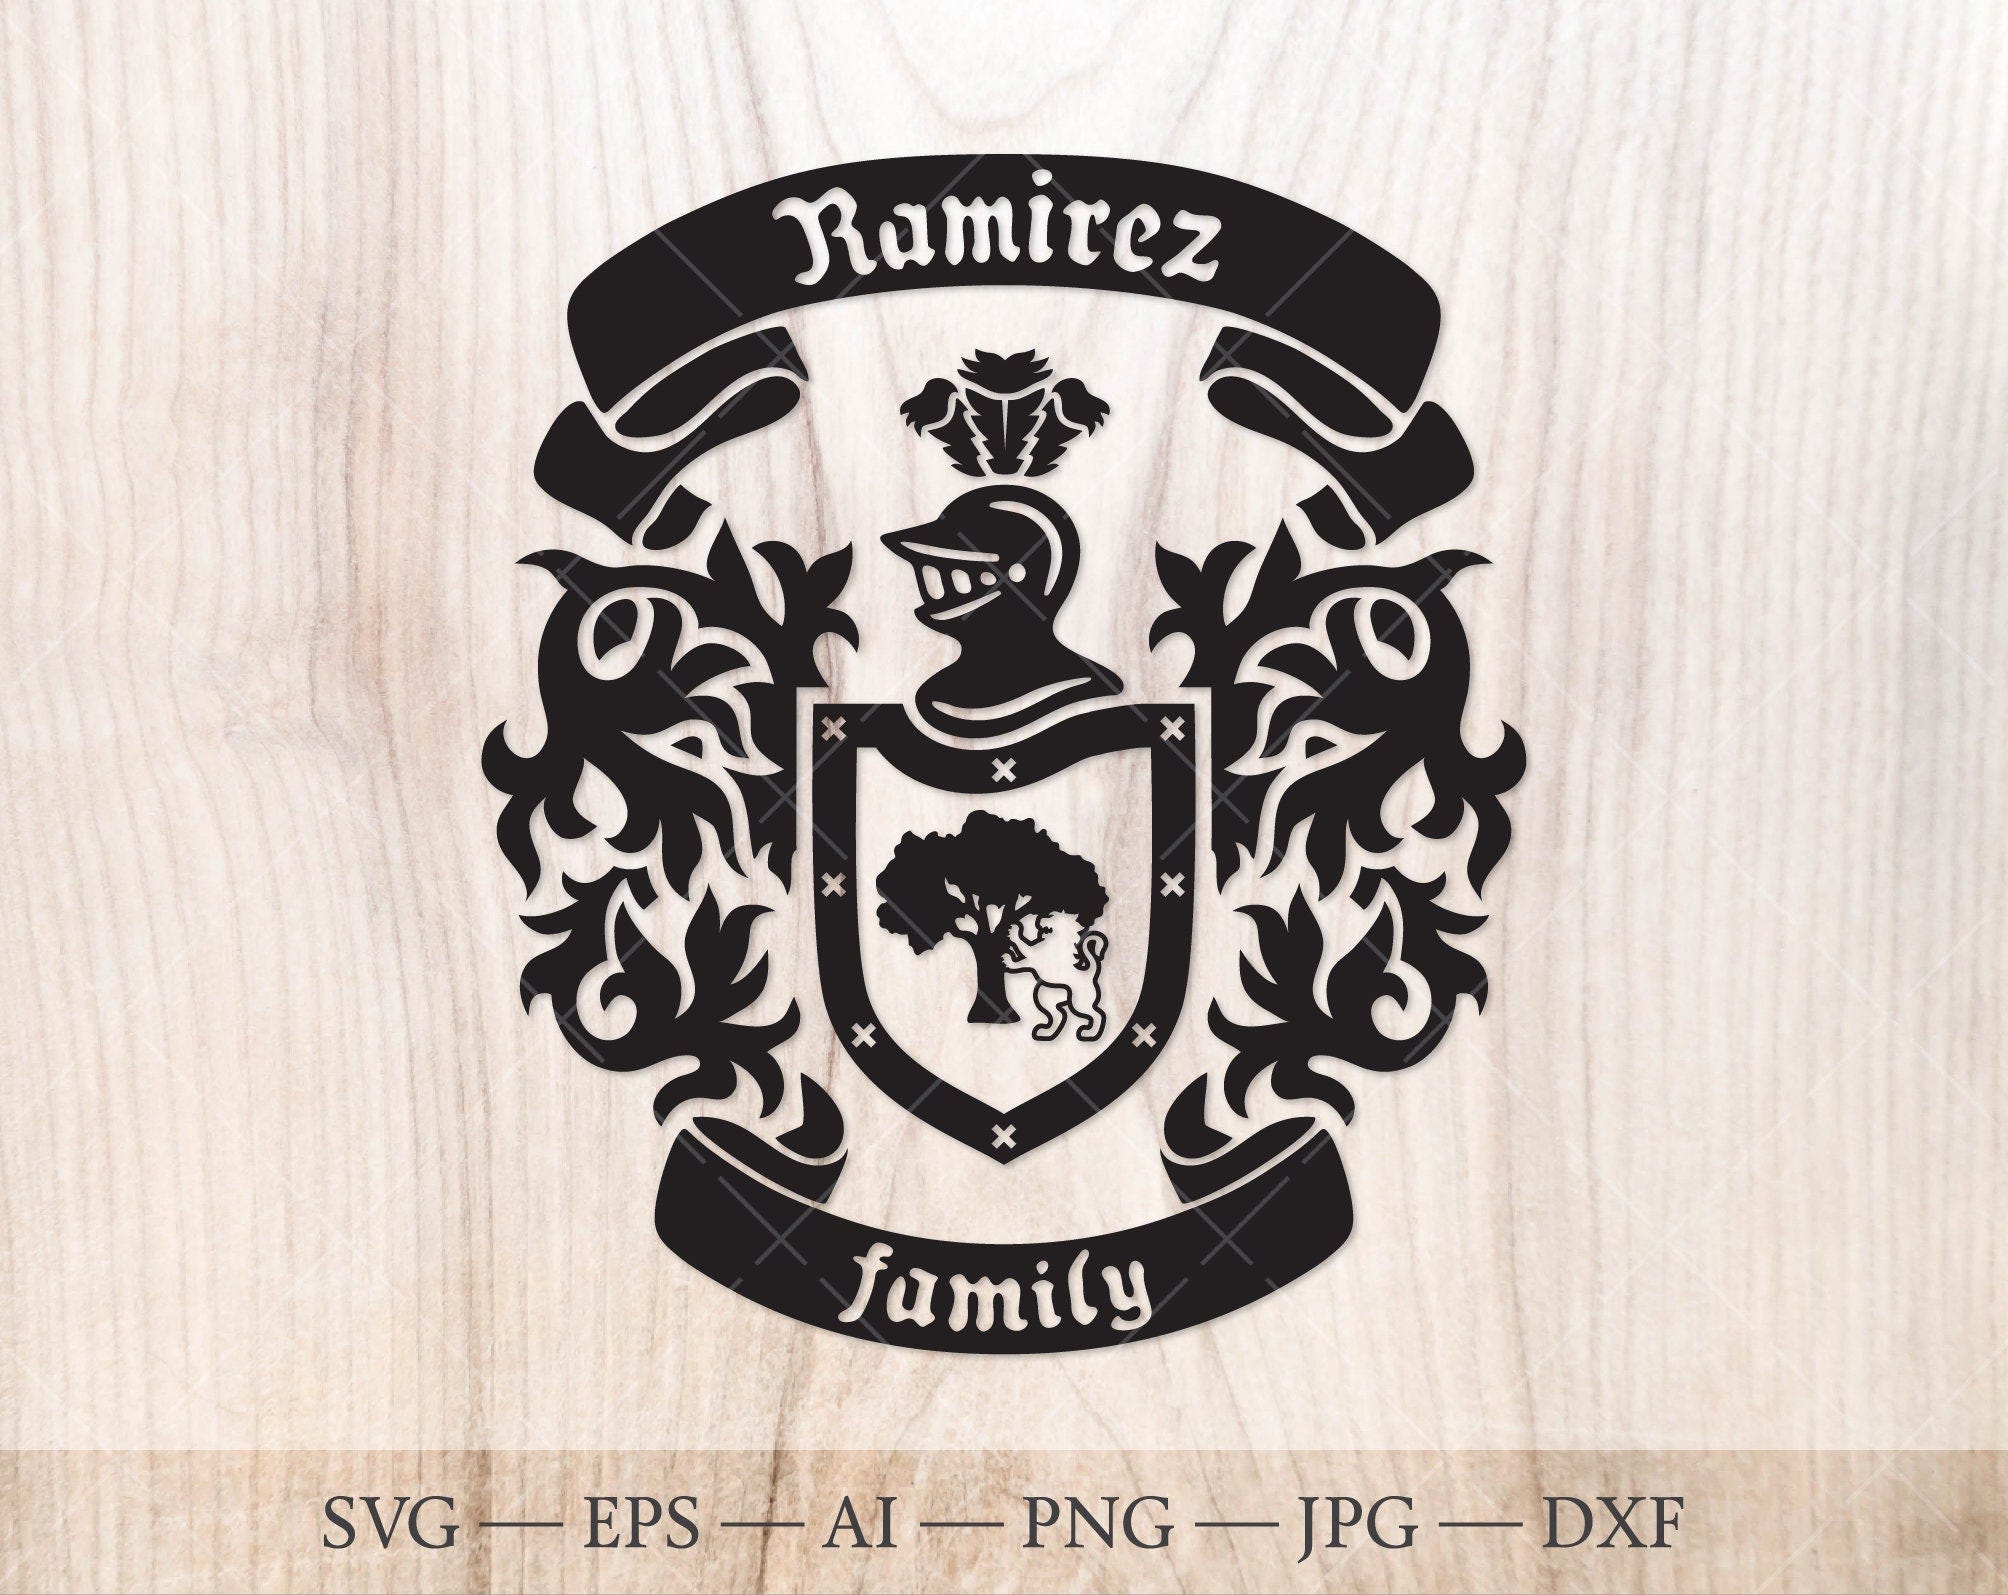 Ramirez Family crest. Coat of arms svg. Heraldic shield with tree and white lion, ribbon banners SVG.